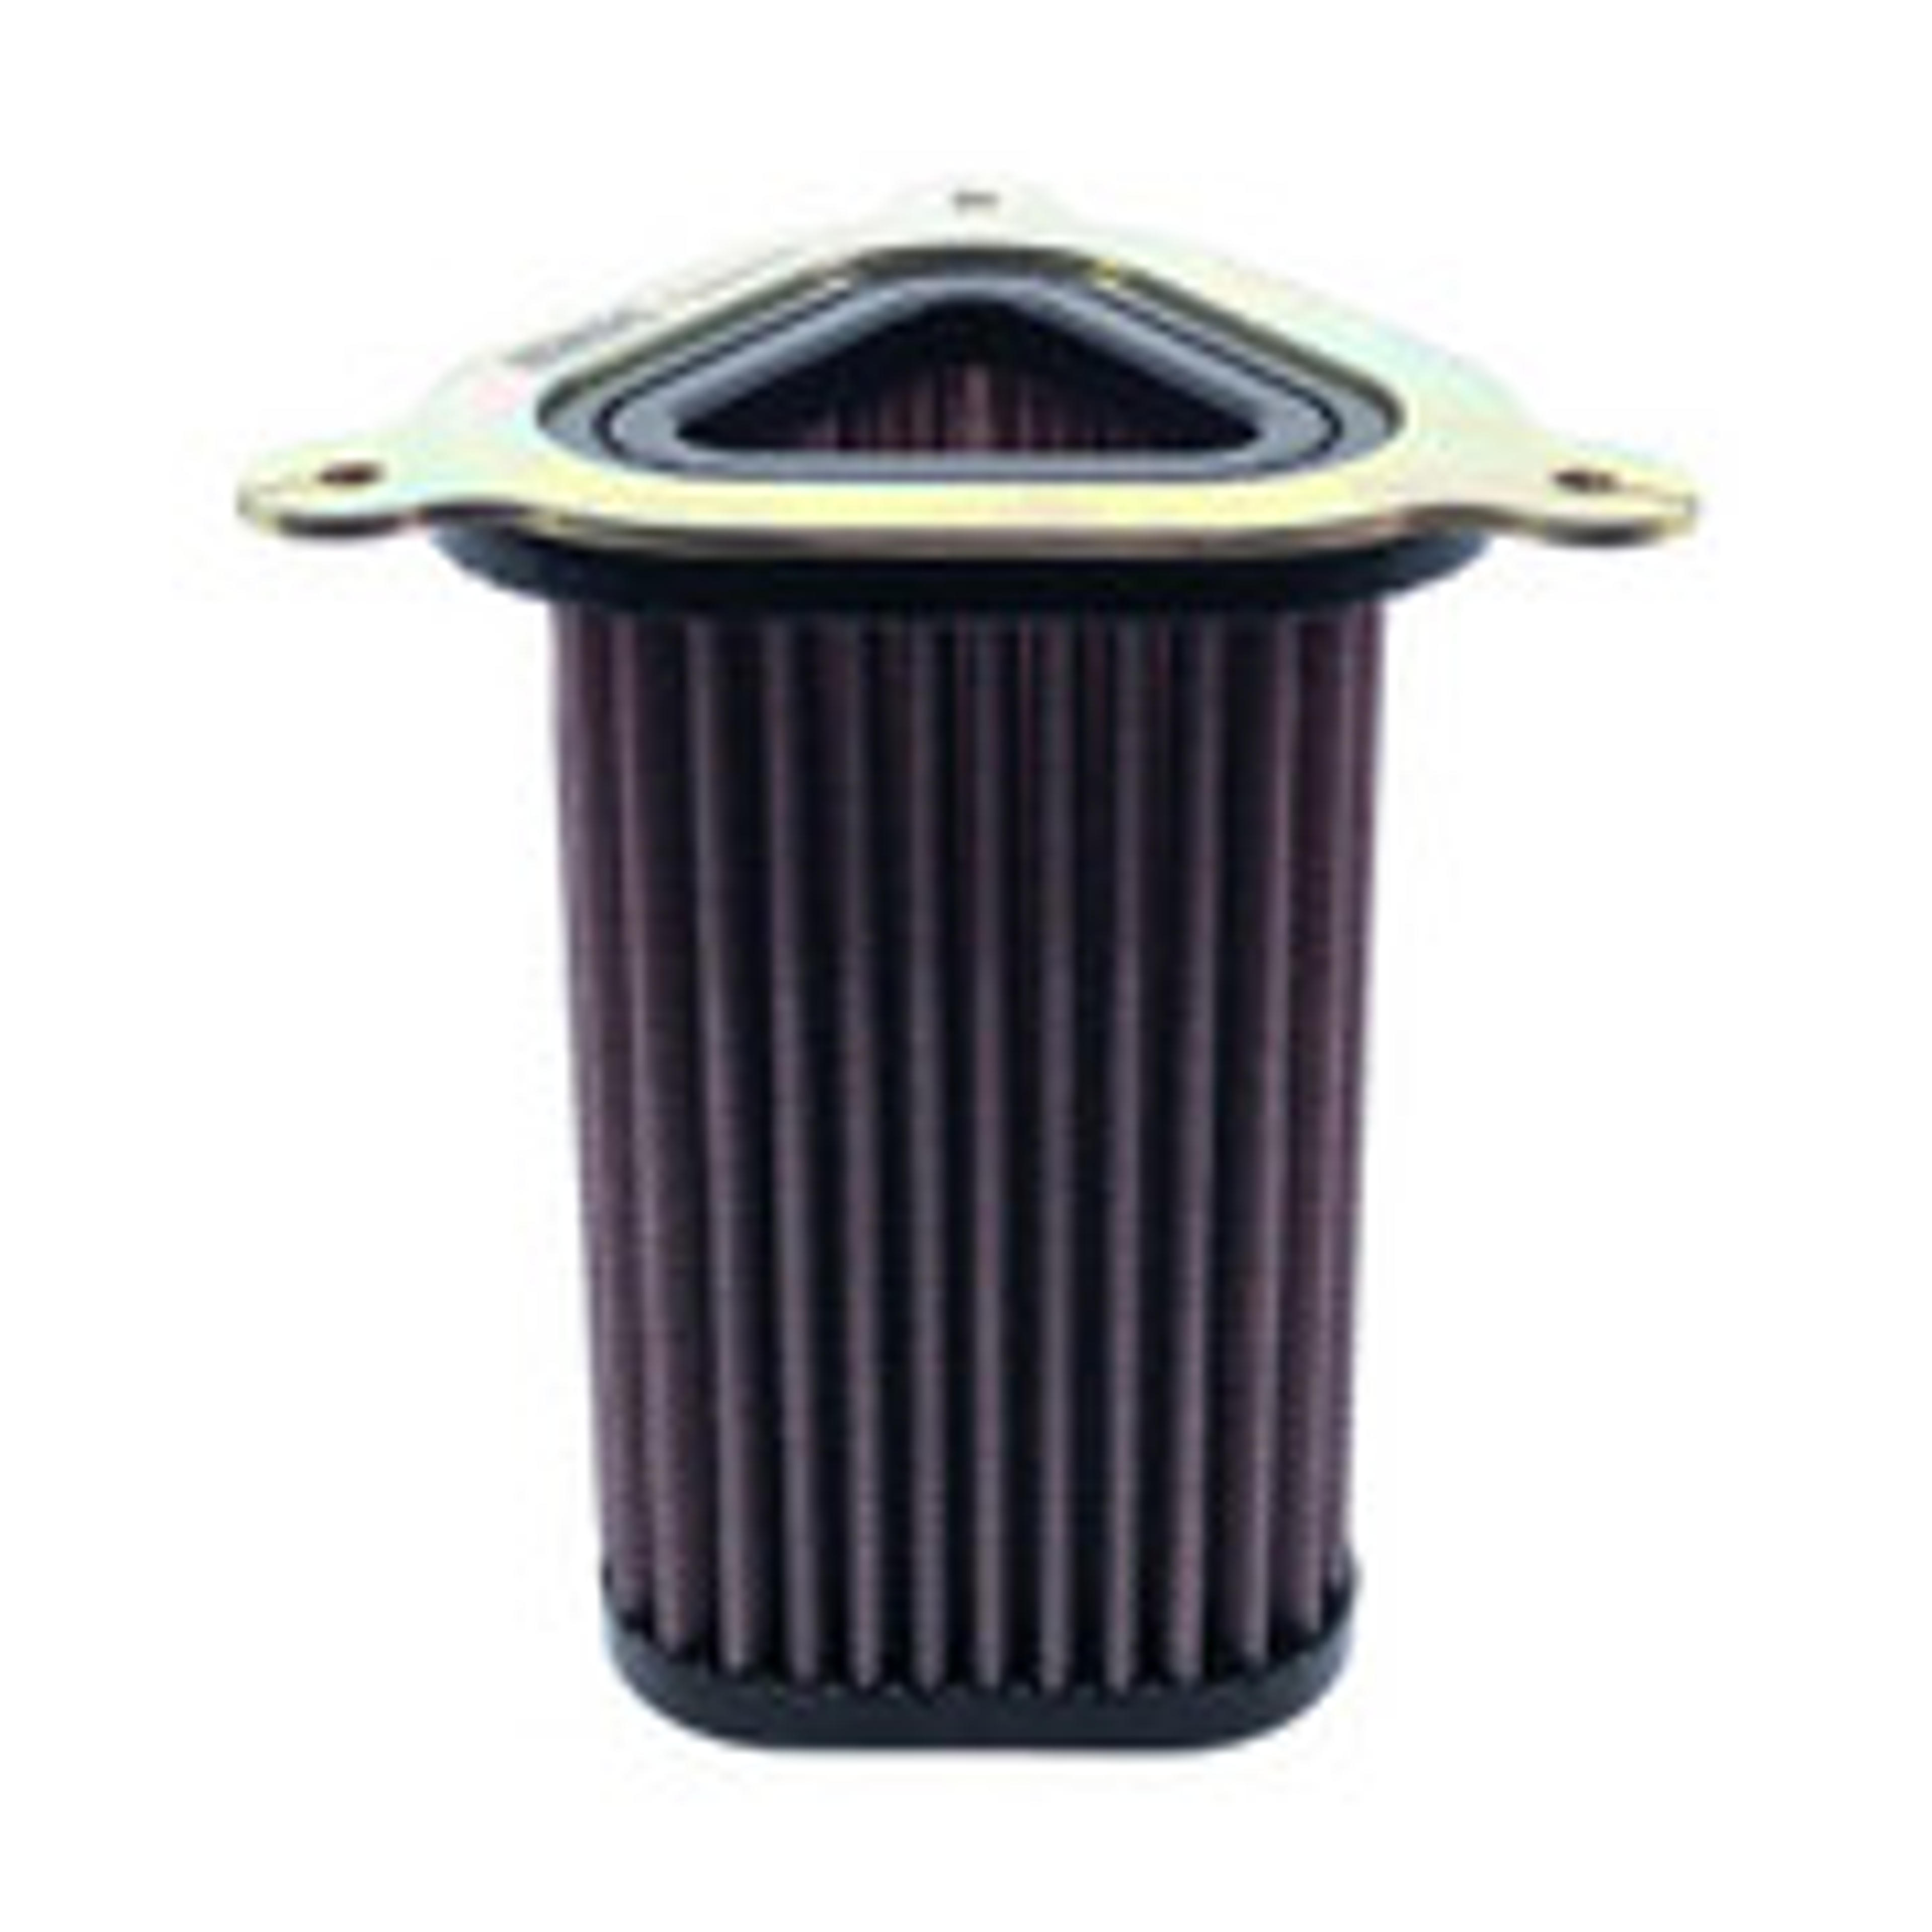 AIR FILTER ELEMENT and COVER, DNA, For 650 Interceptor and 650 Continental GT